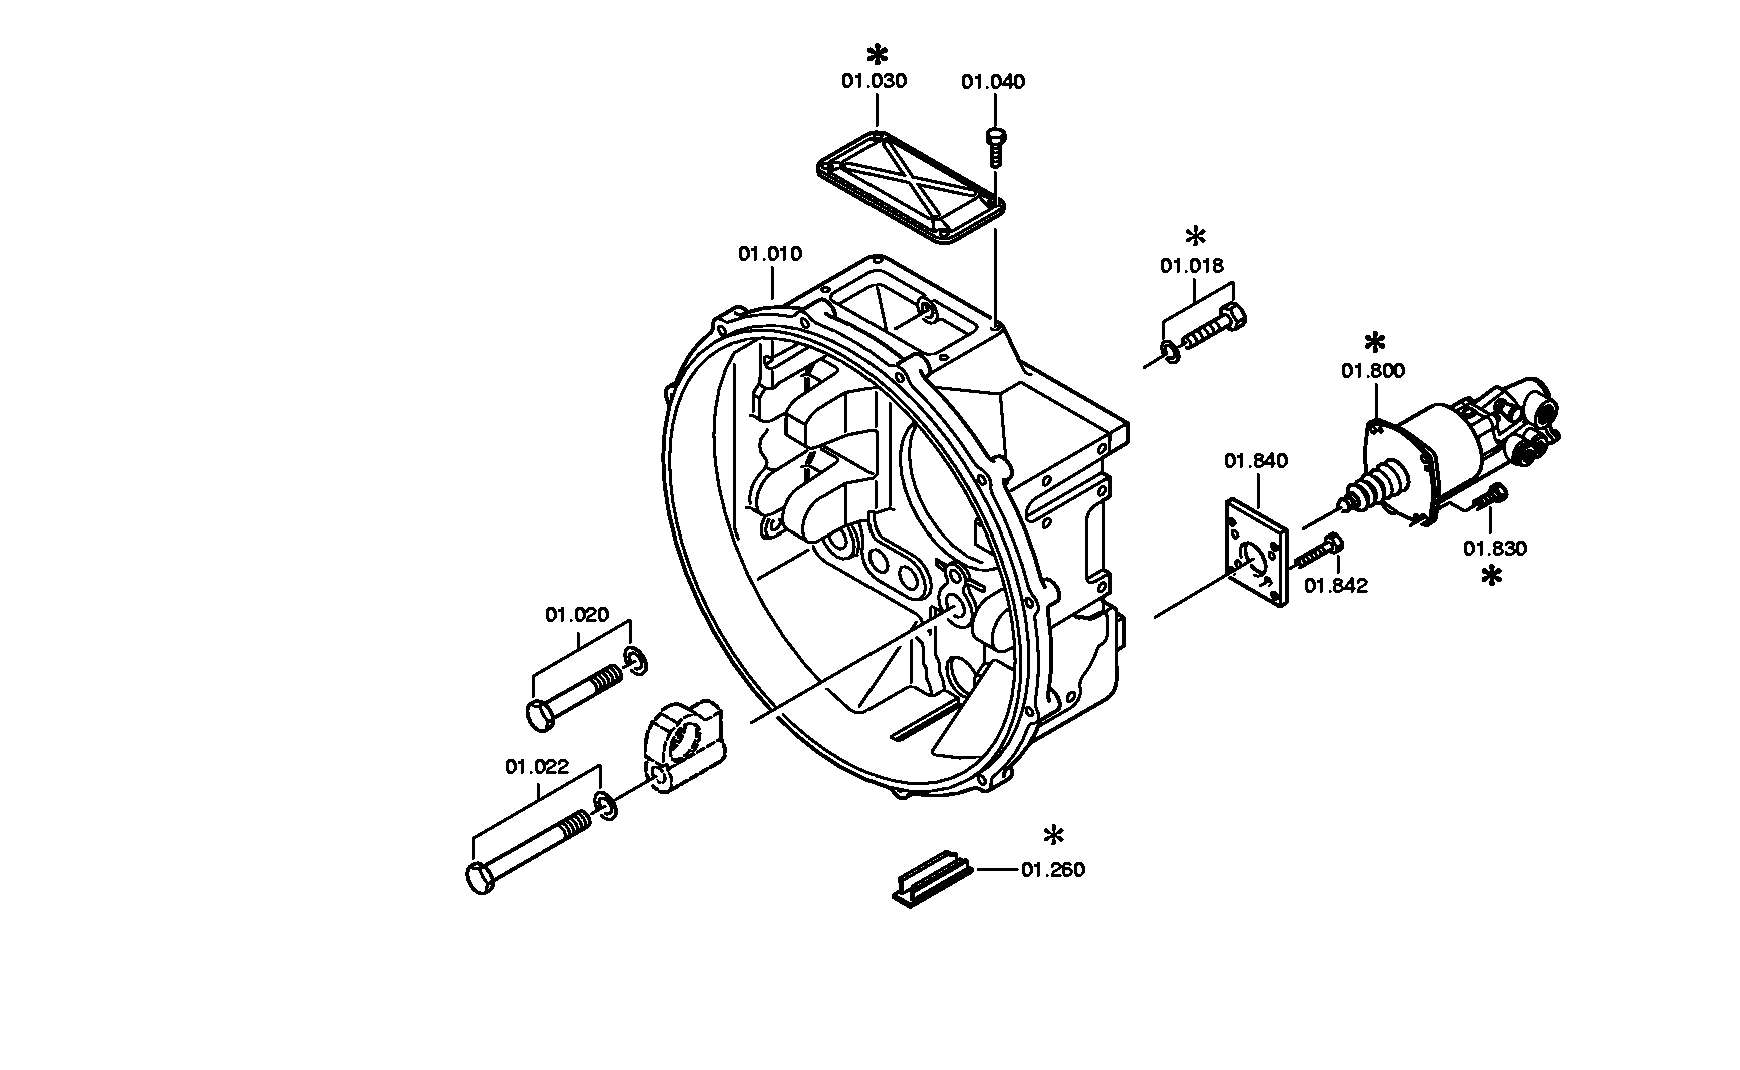 drawing for NISSAN MOTOR CO. 32002135 - RELEASE DEVICE (figure 3)